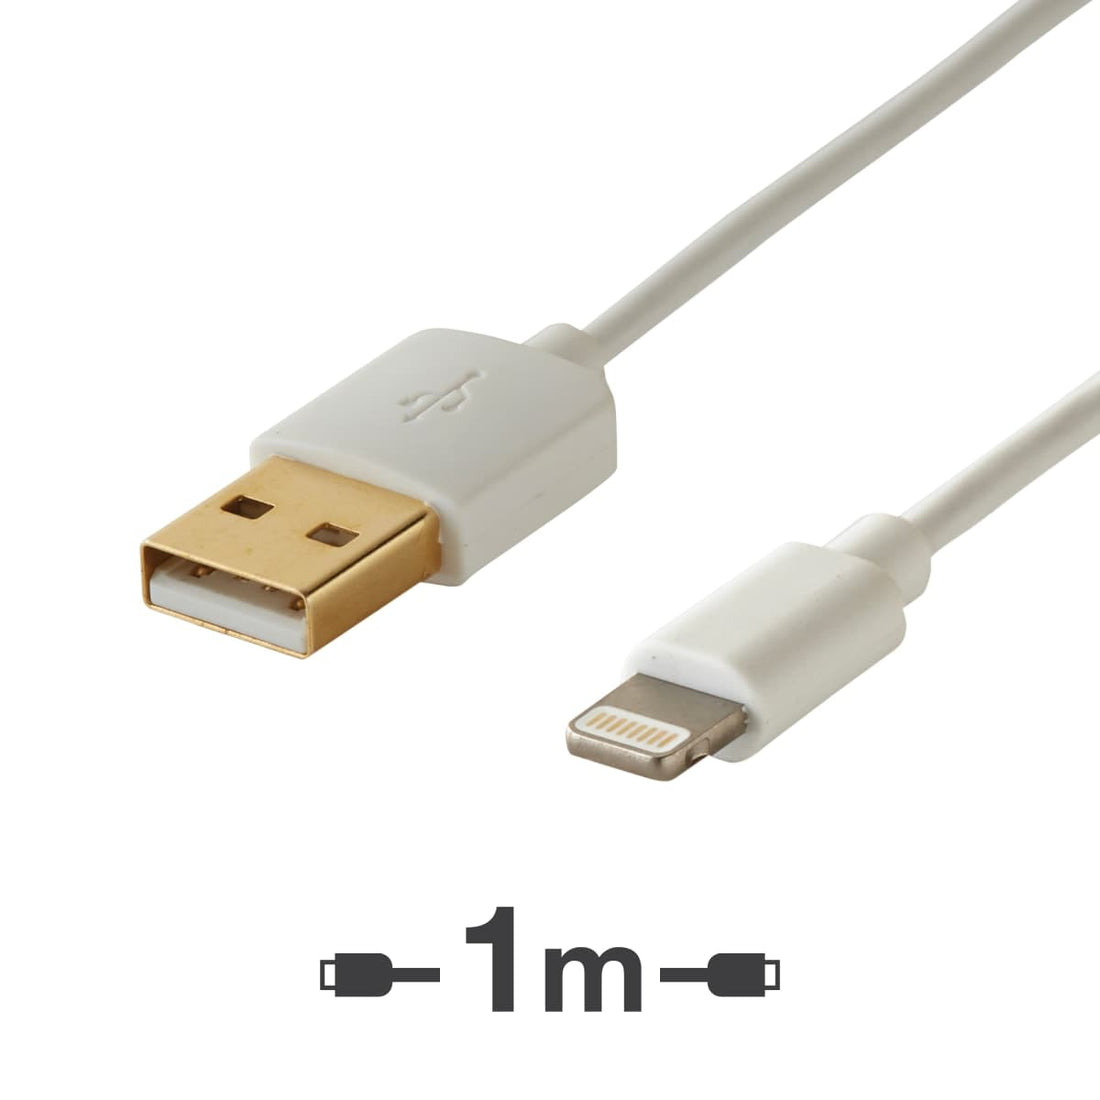 APPLE CABLE 1MT LIGHTNING TYPE / A TYPE USB - best price from Maltashopper.com BR420005315